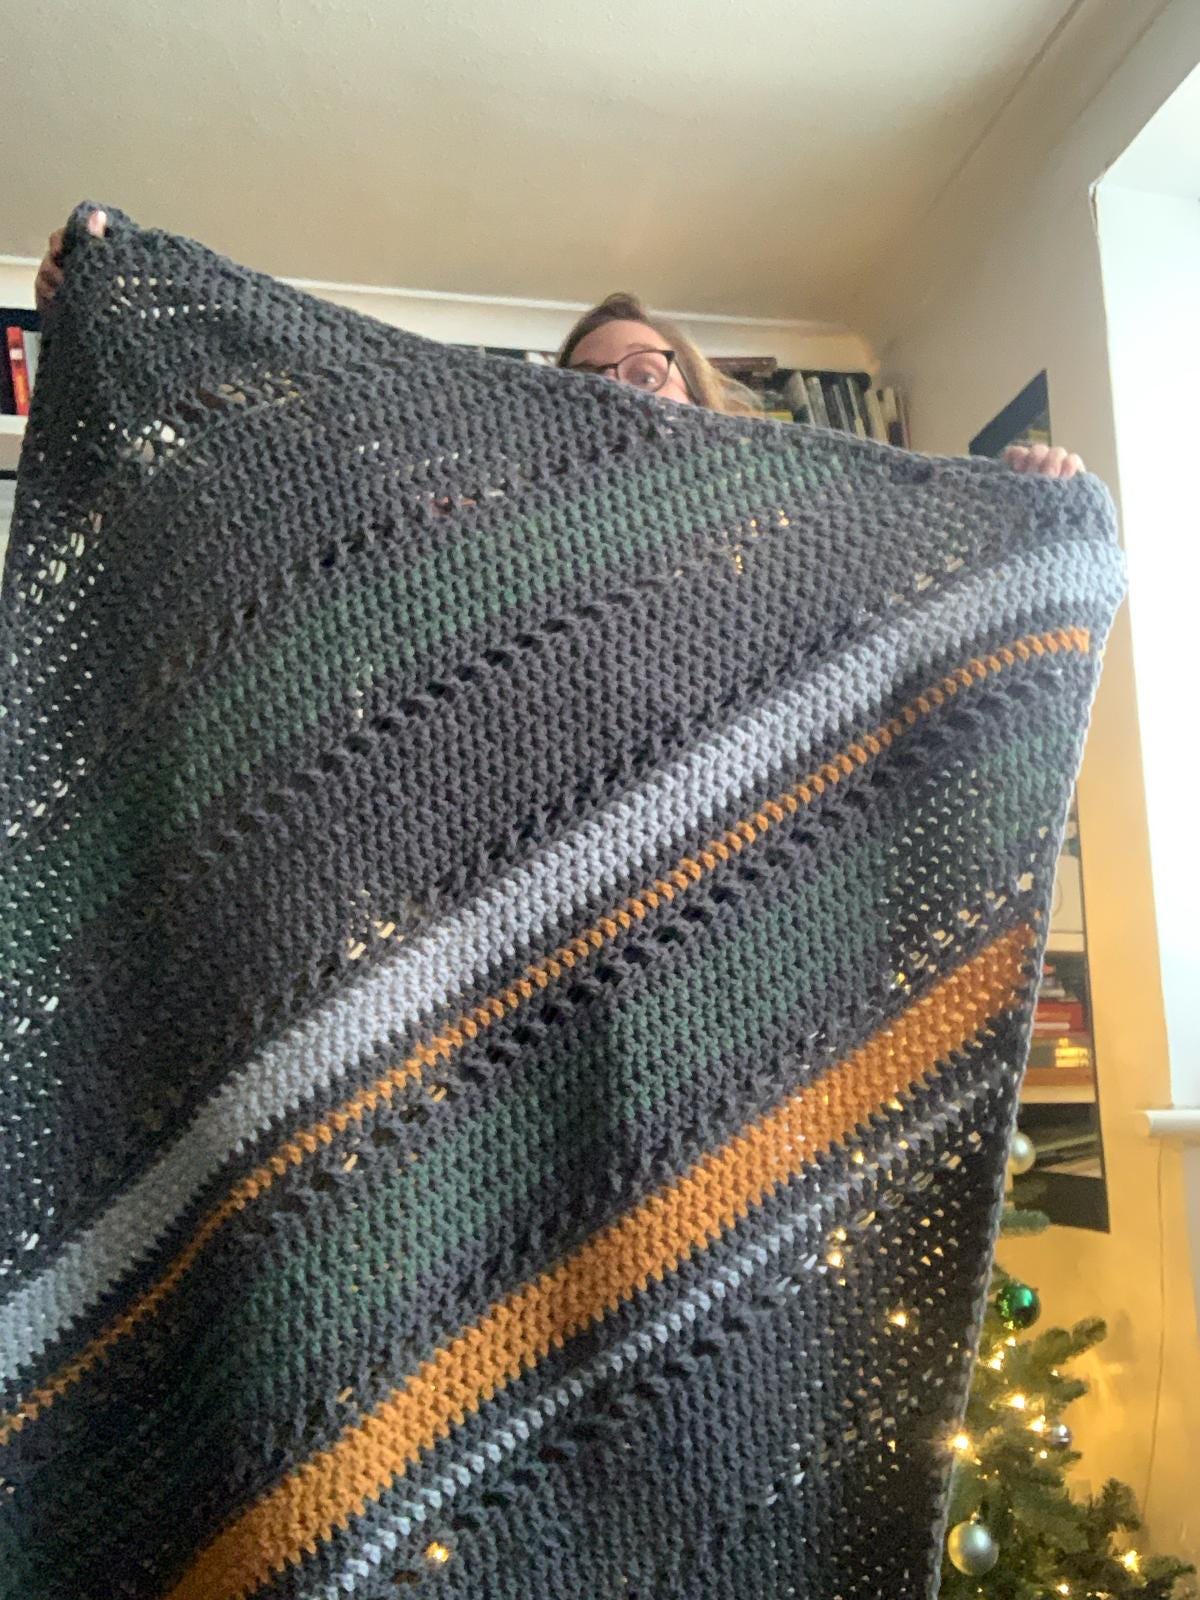 Jo holds up a grey, green and yellow striped crochet blanket as tall as her, standing in front of a Christmas tree.